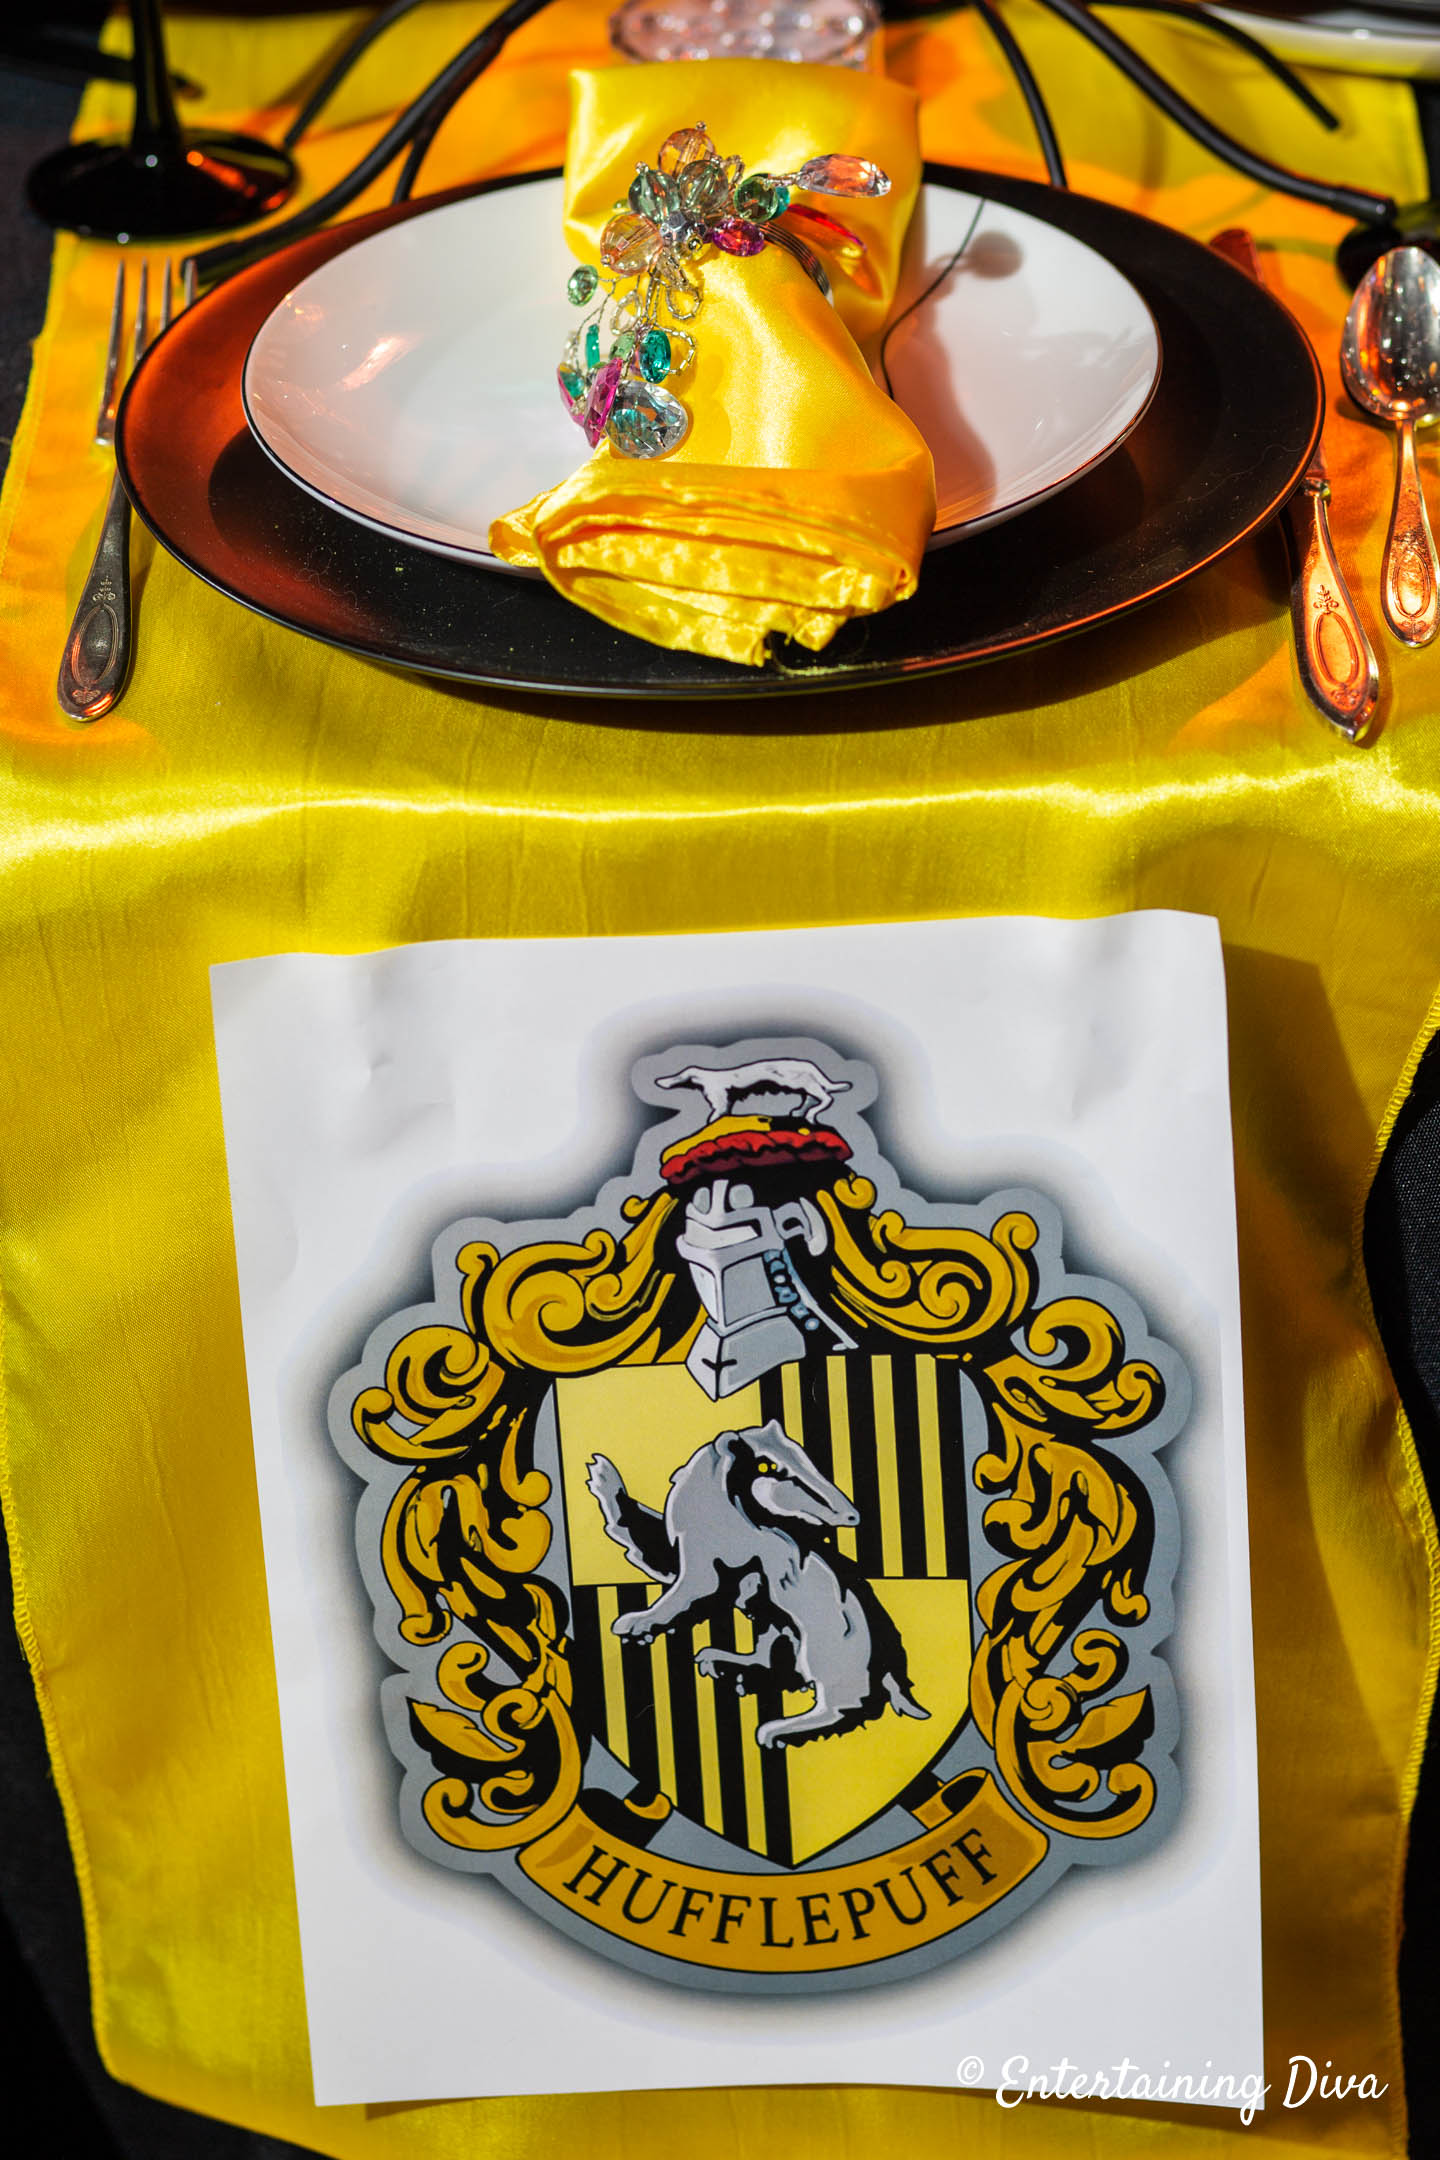 Yellow napkin on black and white plates with a table runner that has the Hufflepuff crest